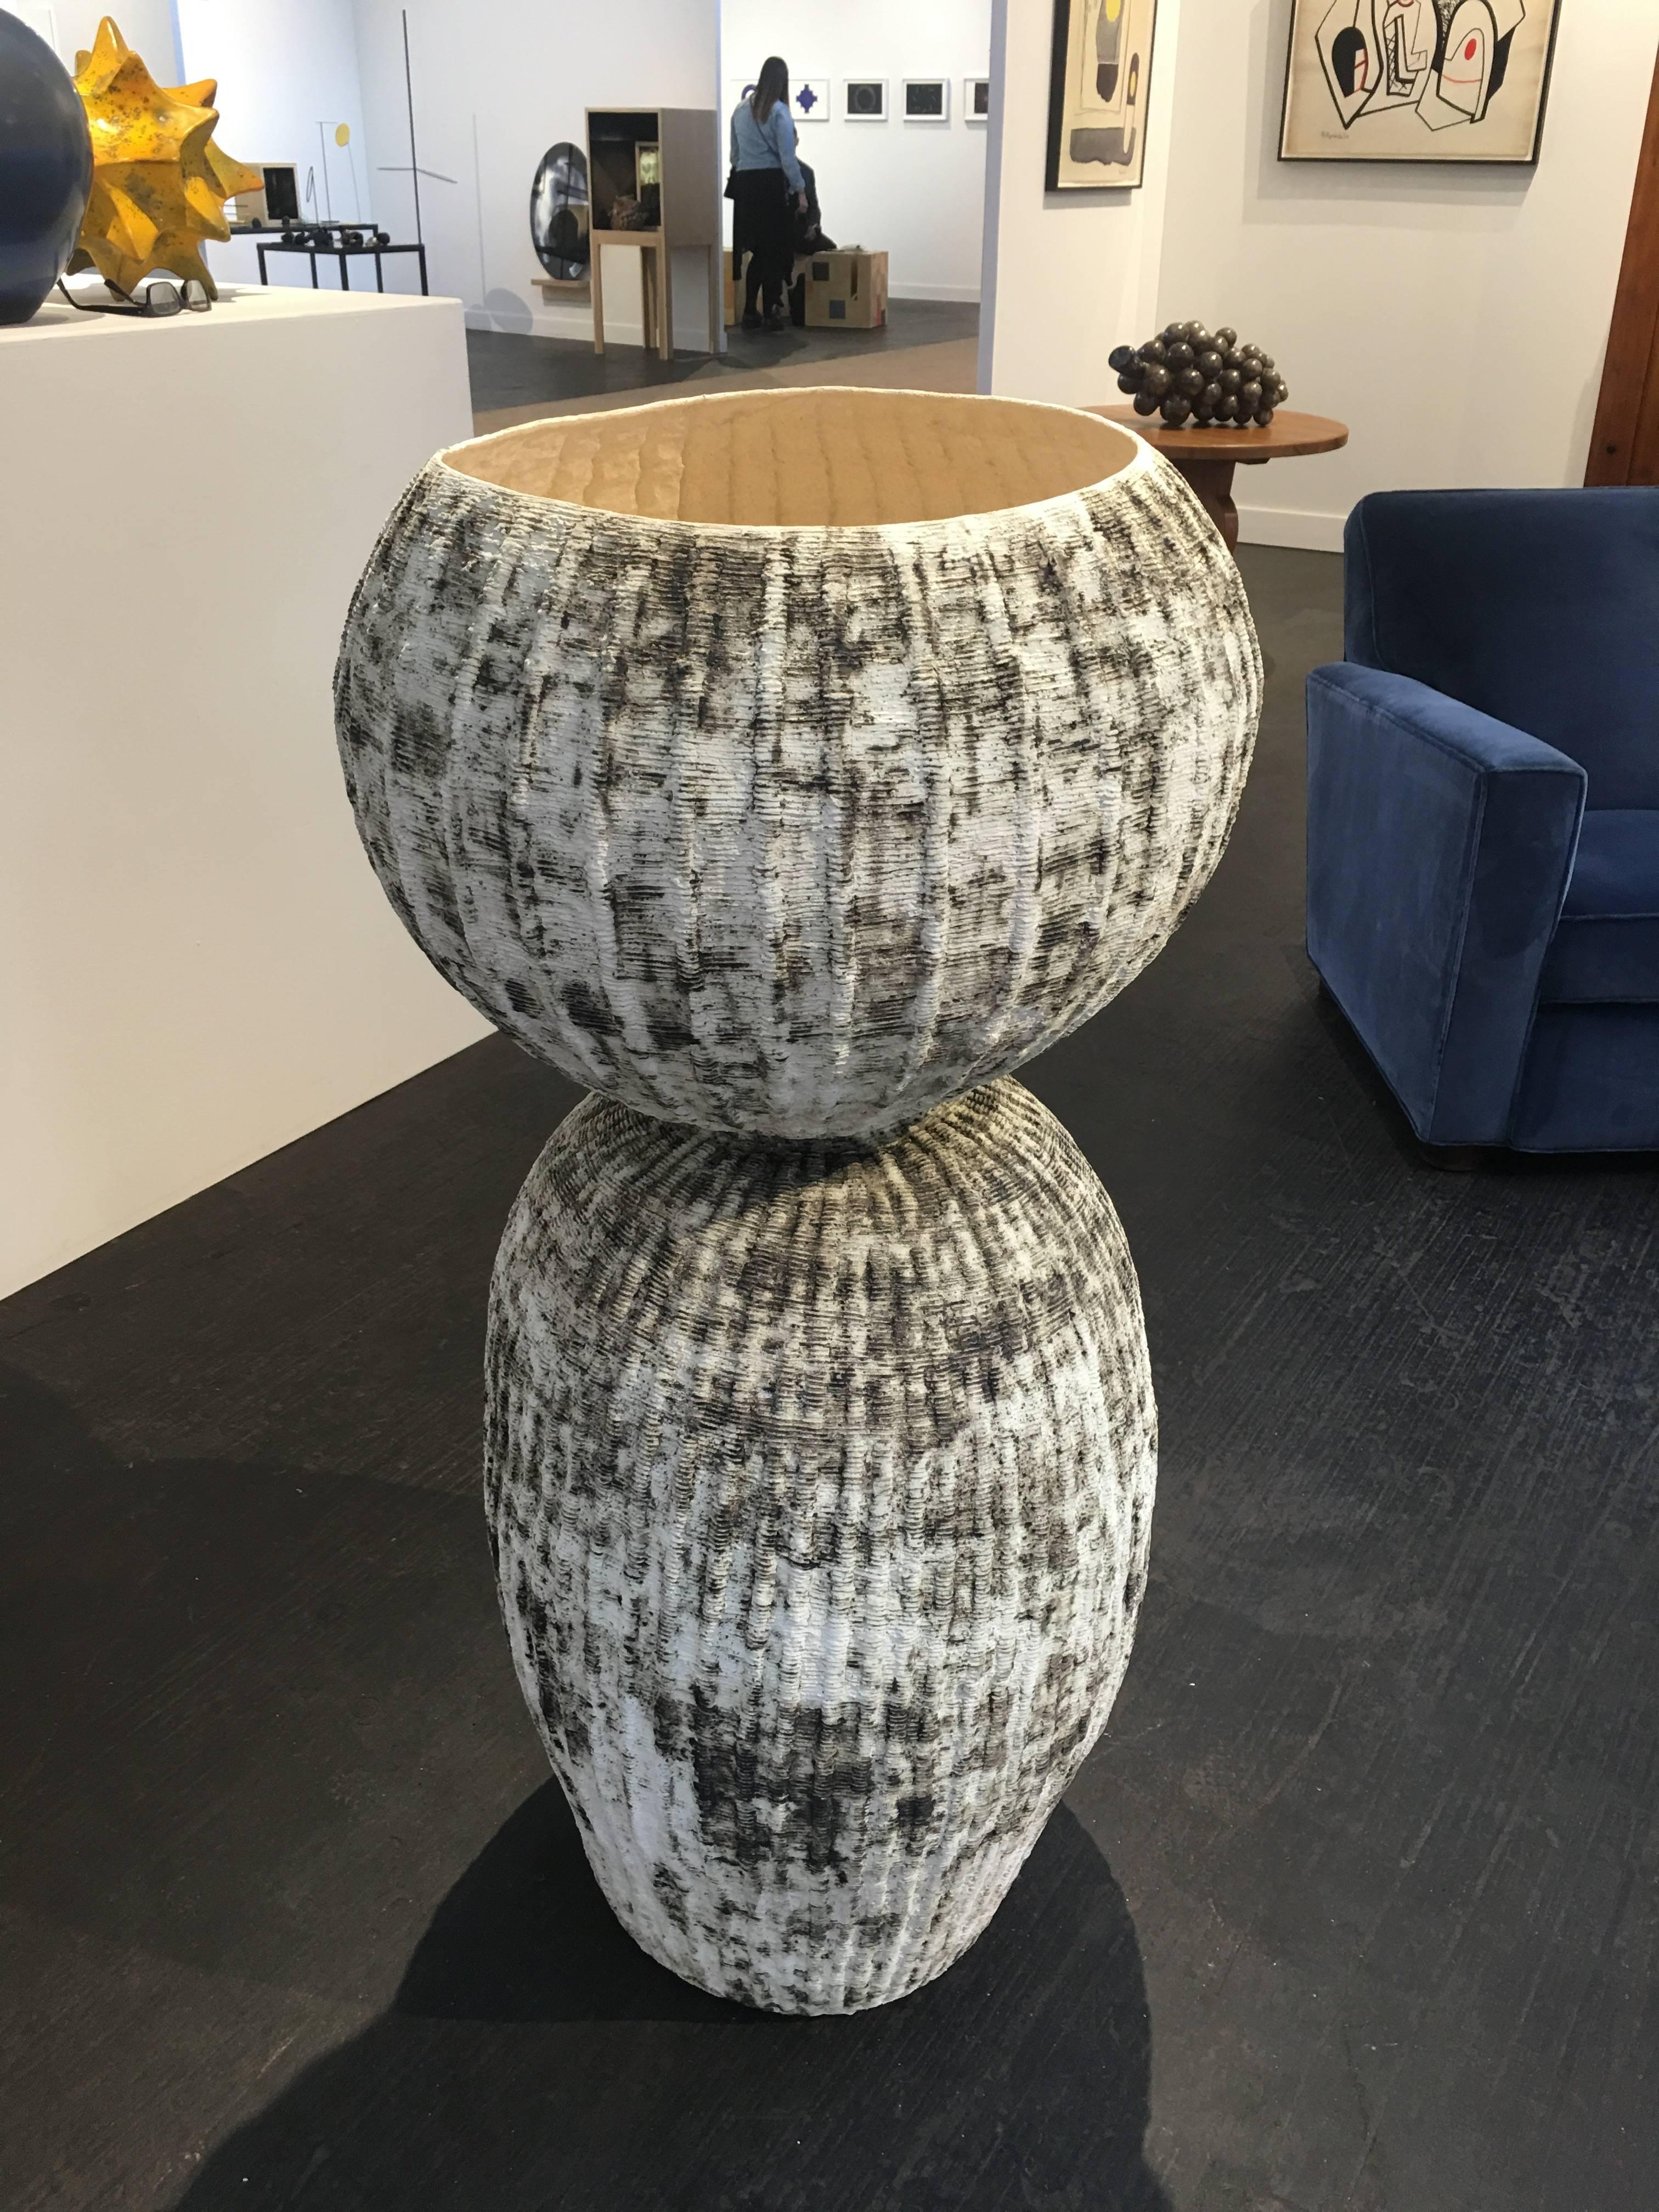 Bubble Urn lII B by Kristina Riska is a handbuilt ceramic urn created in the coil method. This modern sculptural form was created in 2015 for a special exhibit at the Finnish consulate in Washington, DC in September of 2015.

Kristina Riska is a